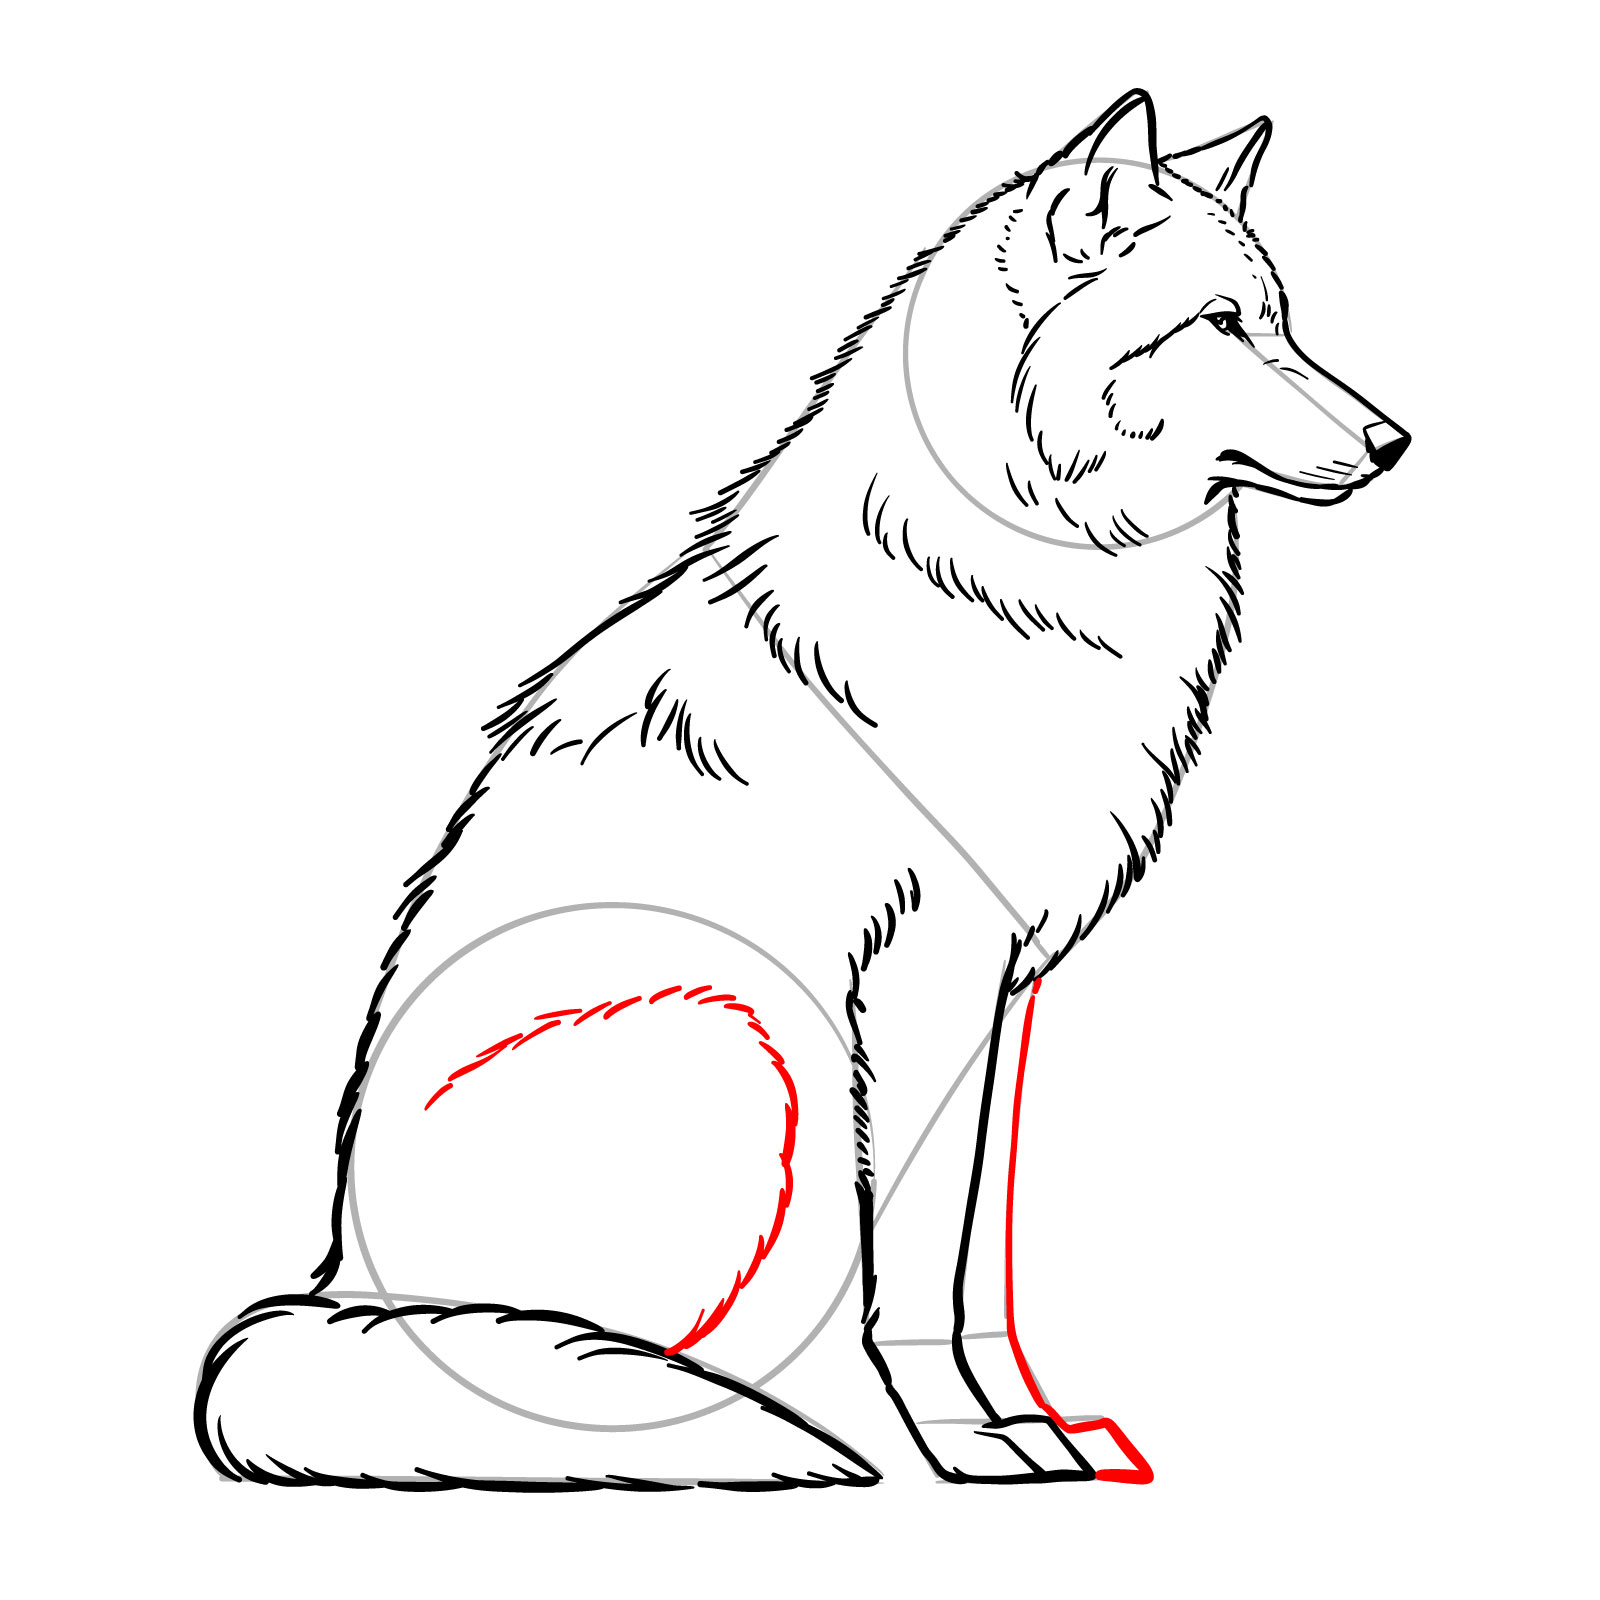 Sketching the second front leg and rear leg in a sitting position for a wolf drawing - step 13